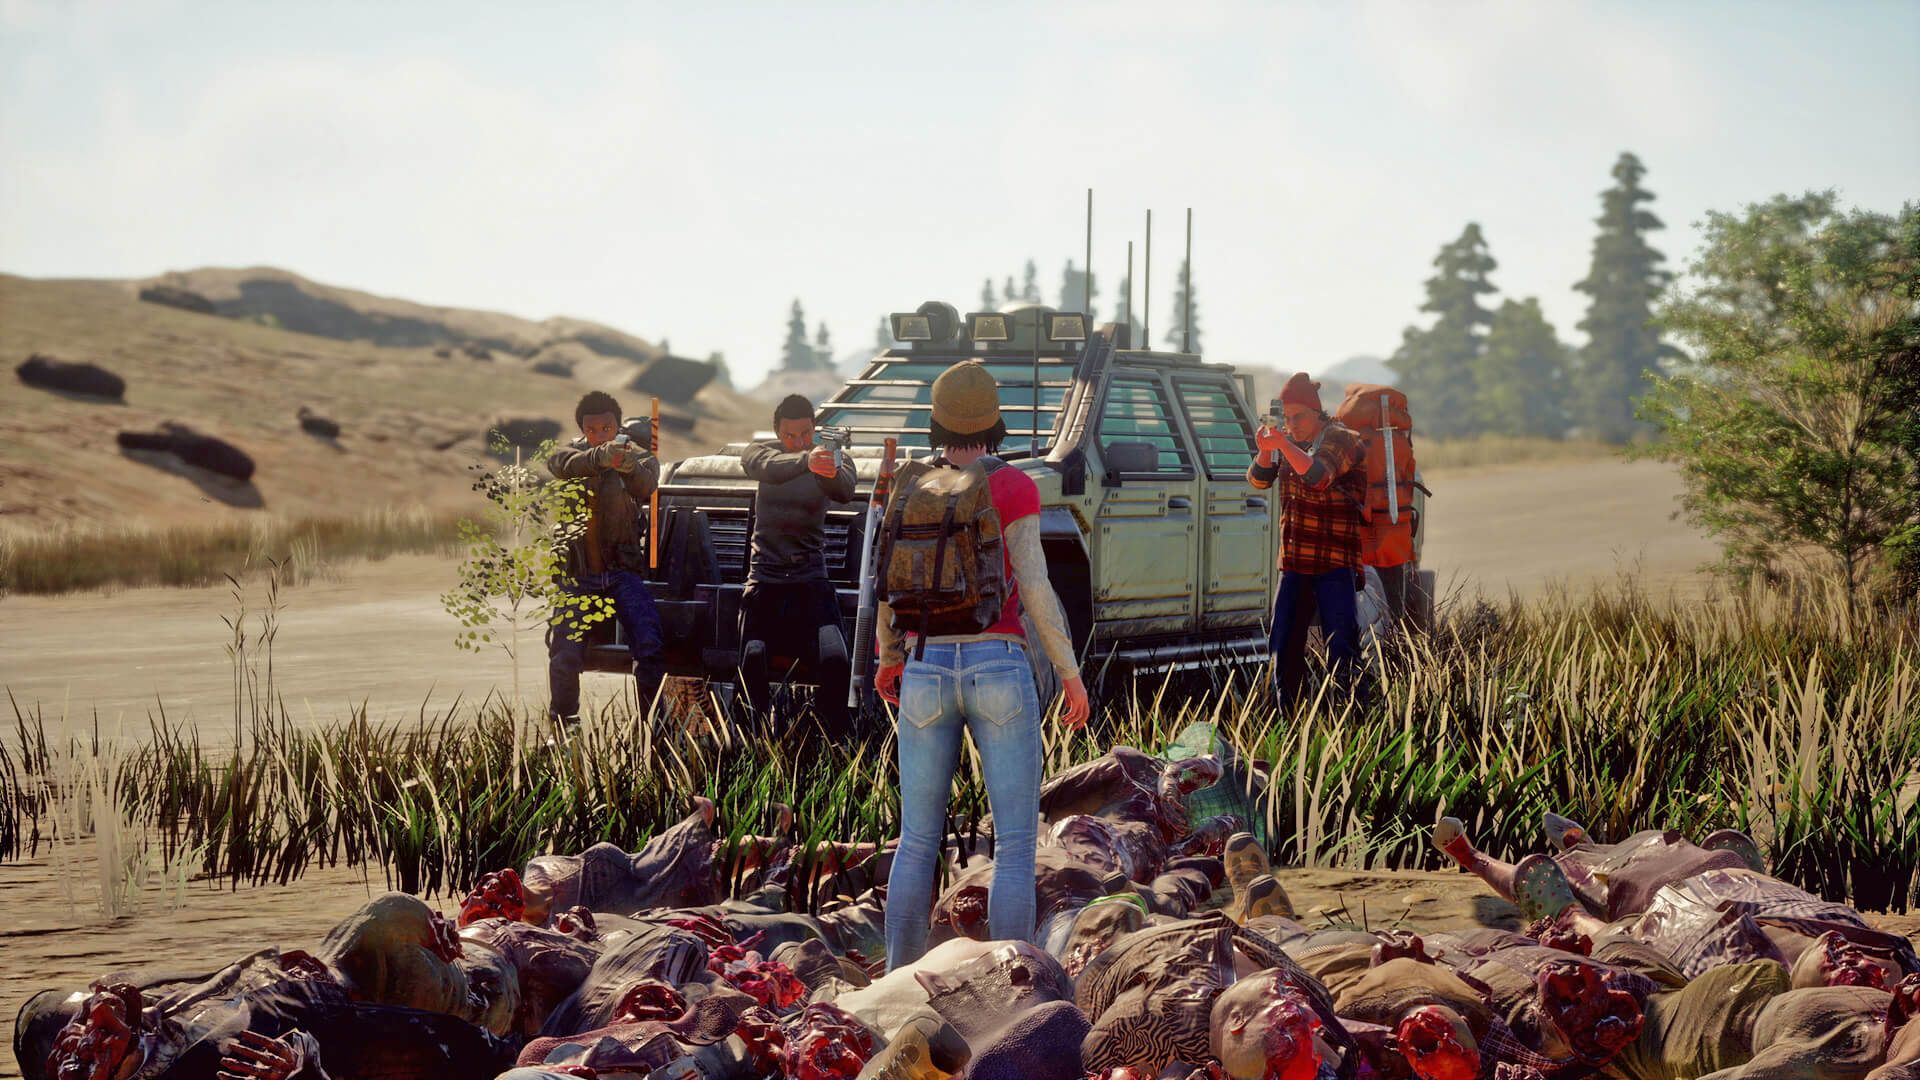 State of Decay Cheats & Trainers for PC